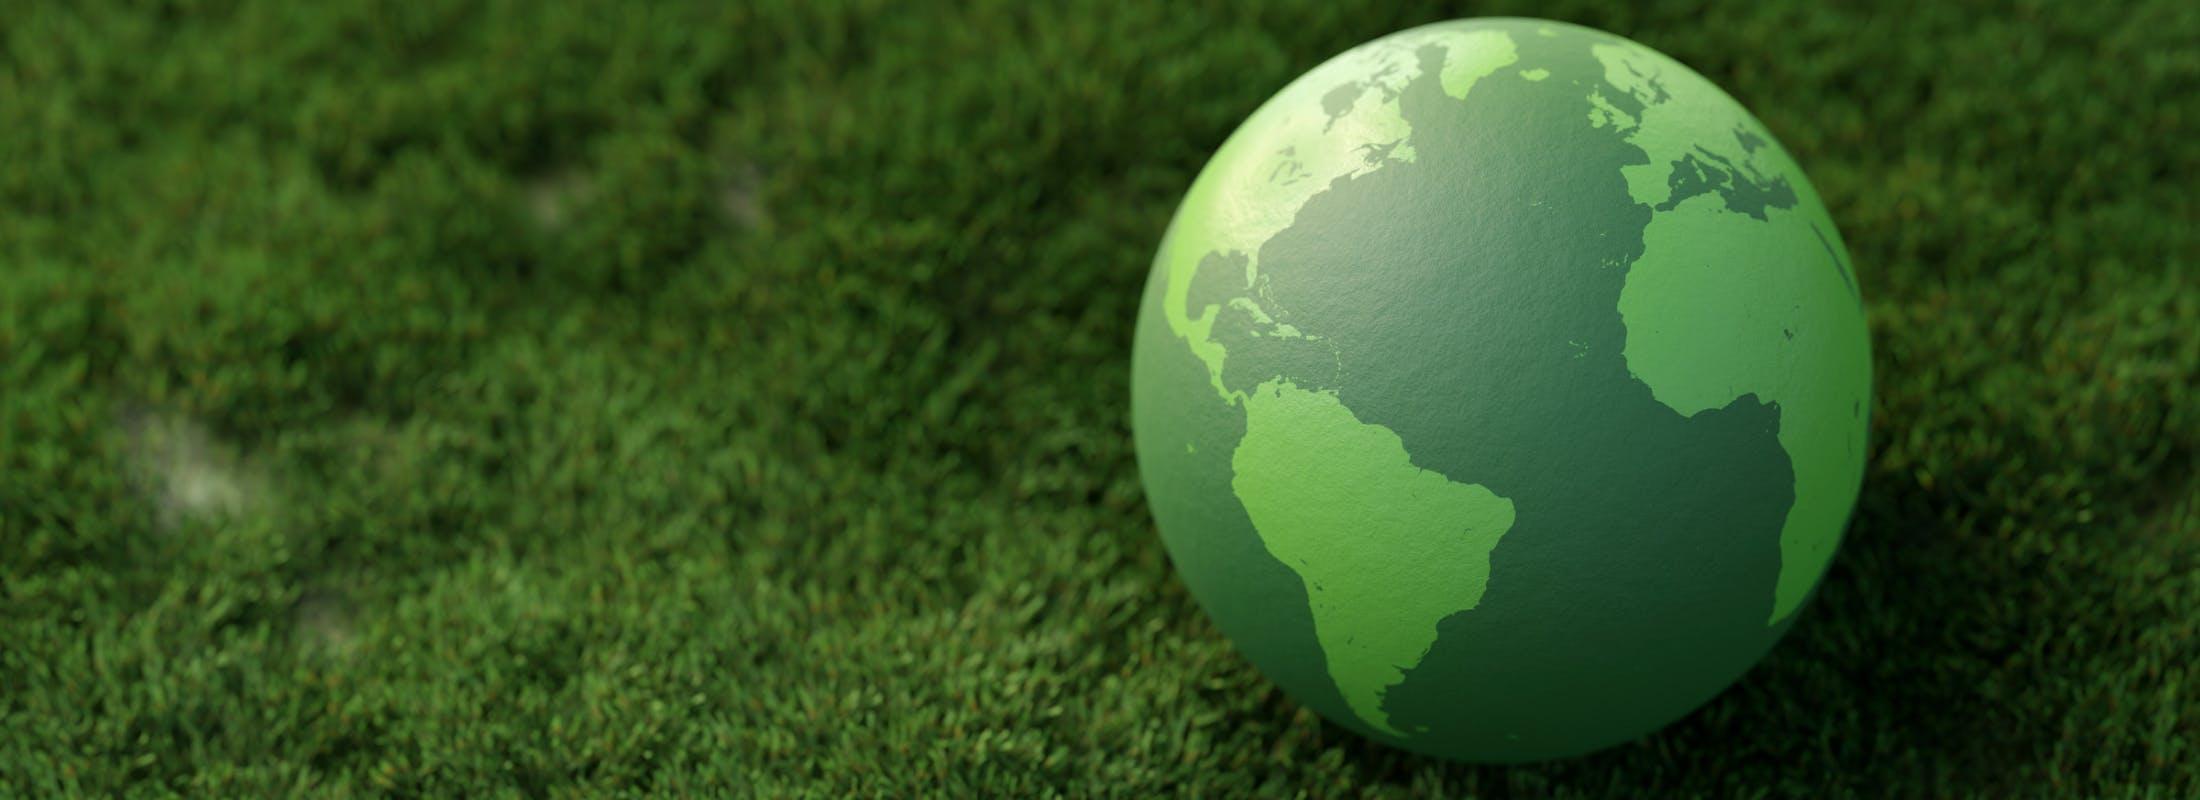 Leveraged finance companies are improving ESG reporting